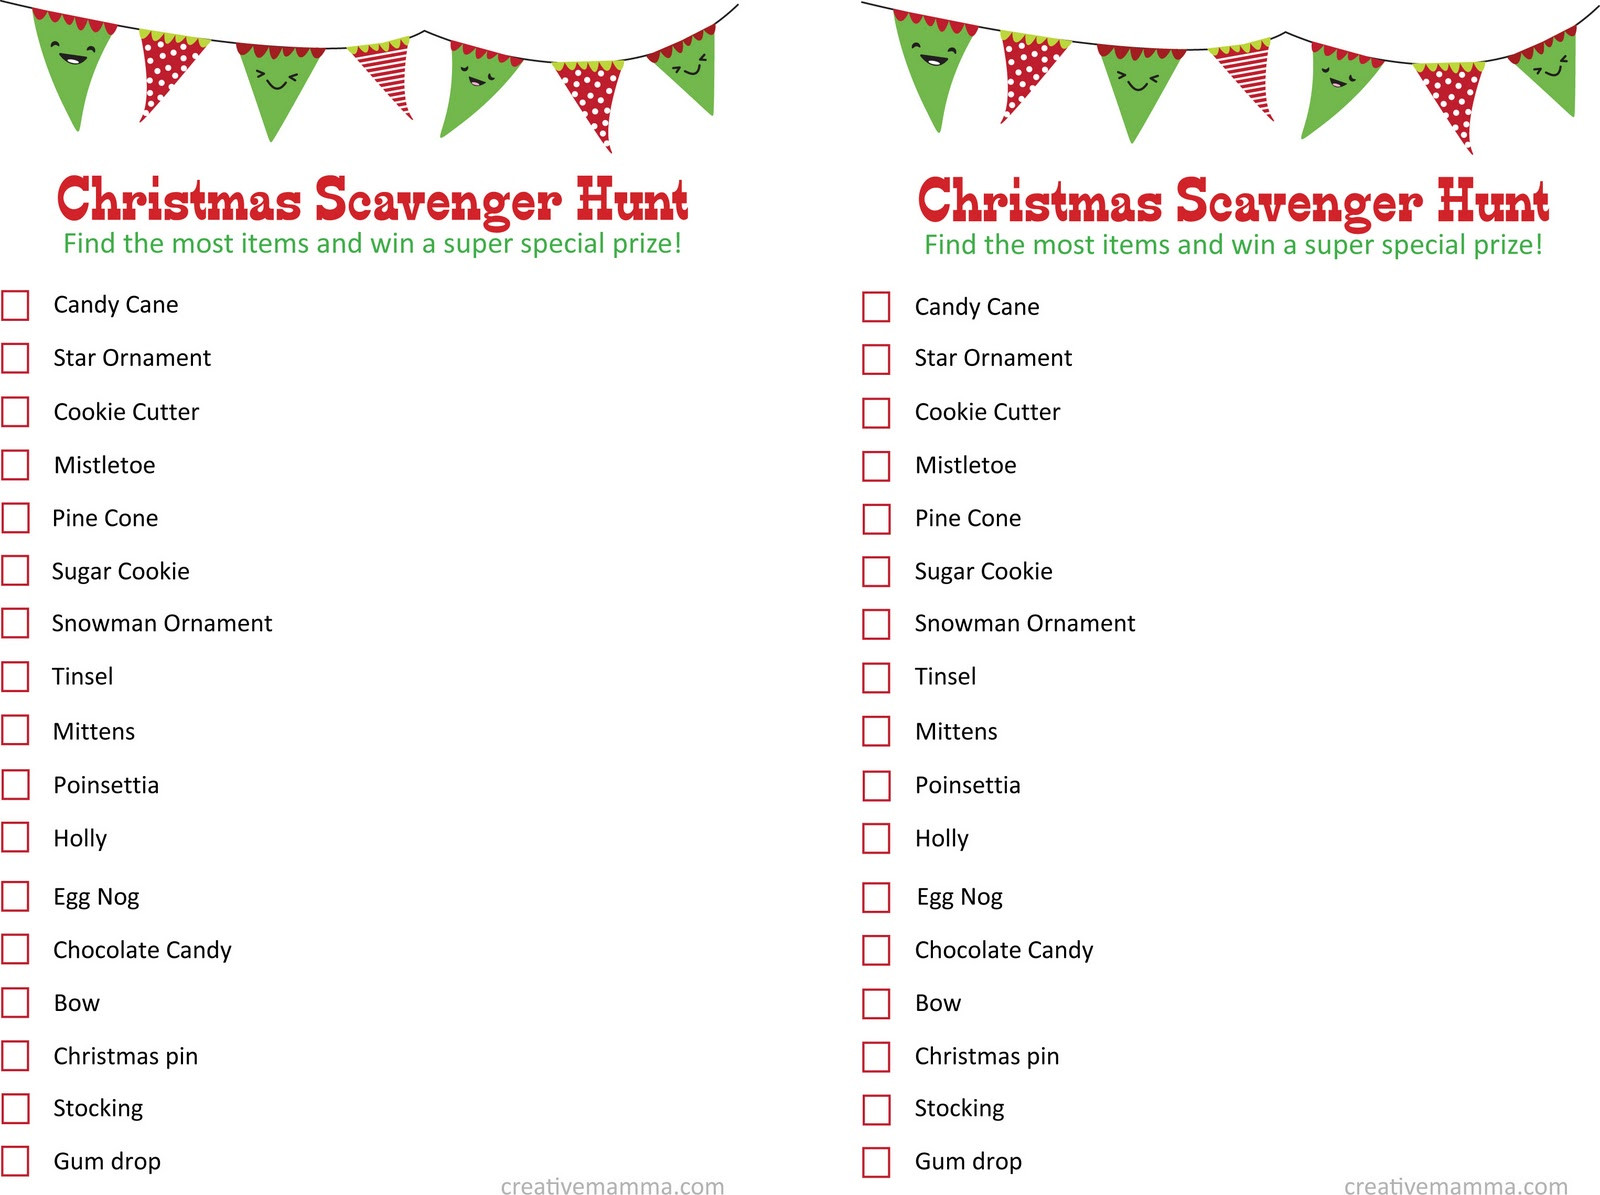 Christmas Party Scavenger Hunt Ideas
 the INSPIRED creative ONE Christmas Party ideas